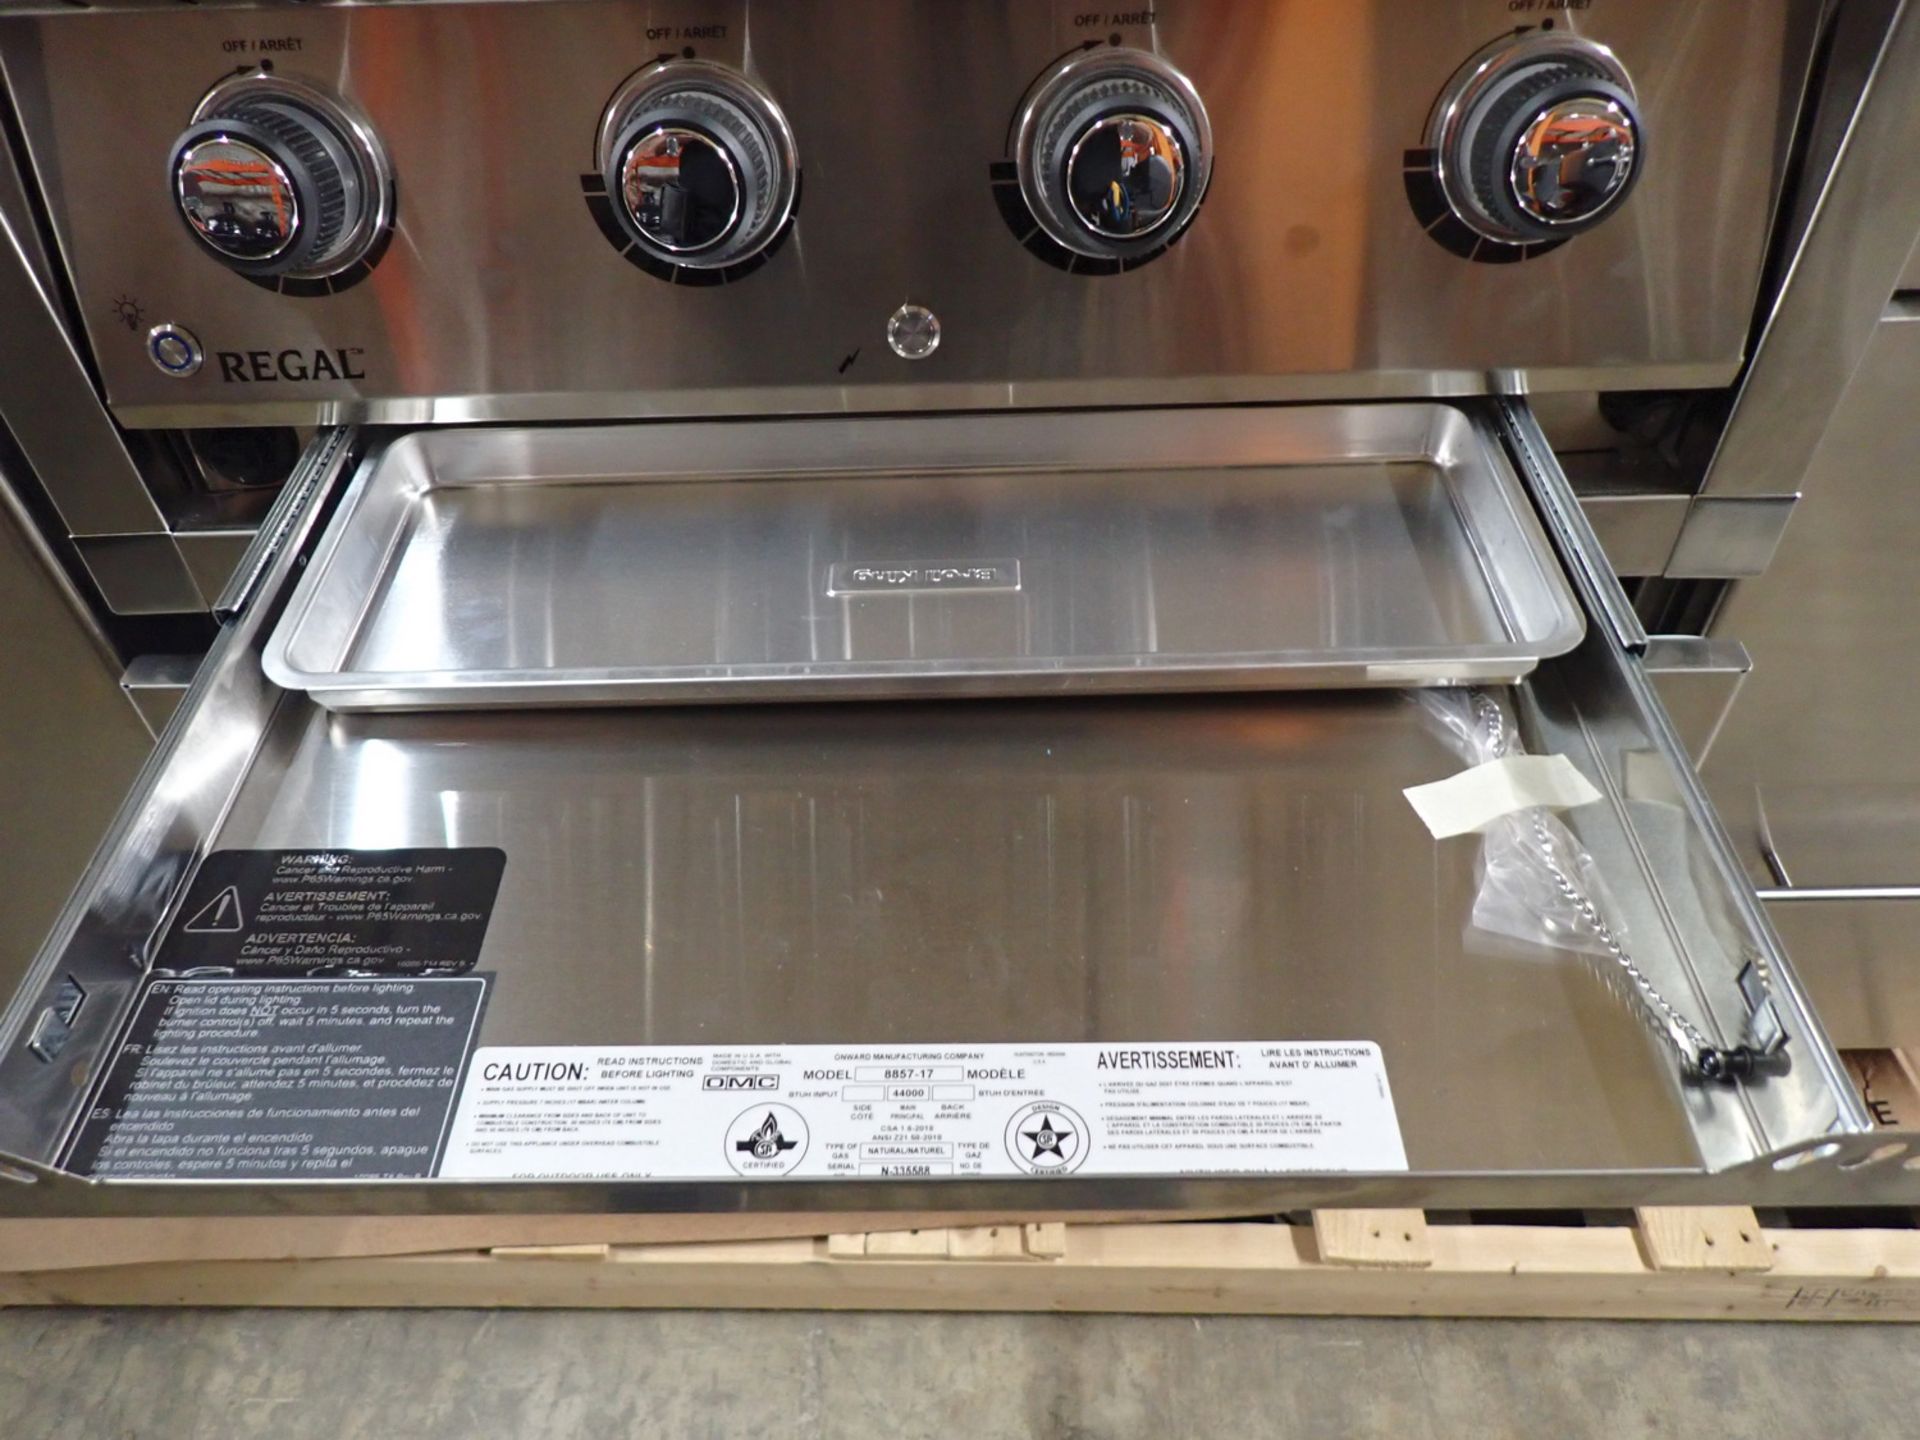 LOT - BROIL KING REGAL S-420 BUILT-IN 4-BURNER NATURAL GAS BBQ W/ STAINLESS STEEL GRID C/W BROIL - Image 6 of 7